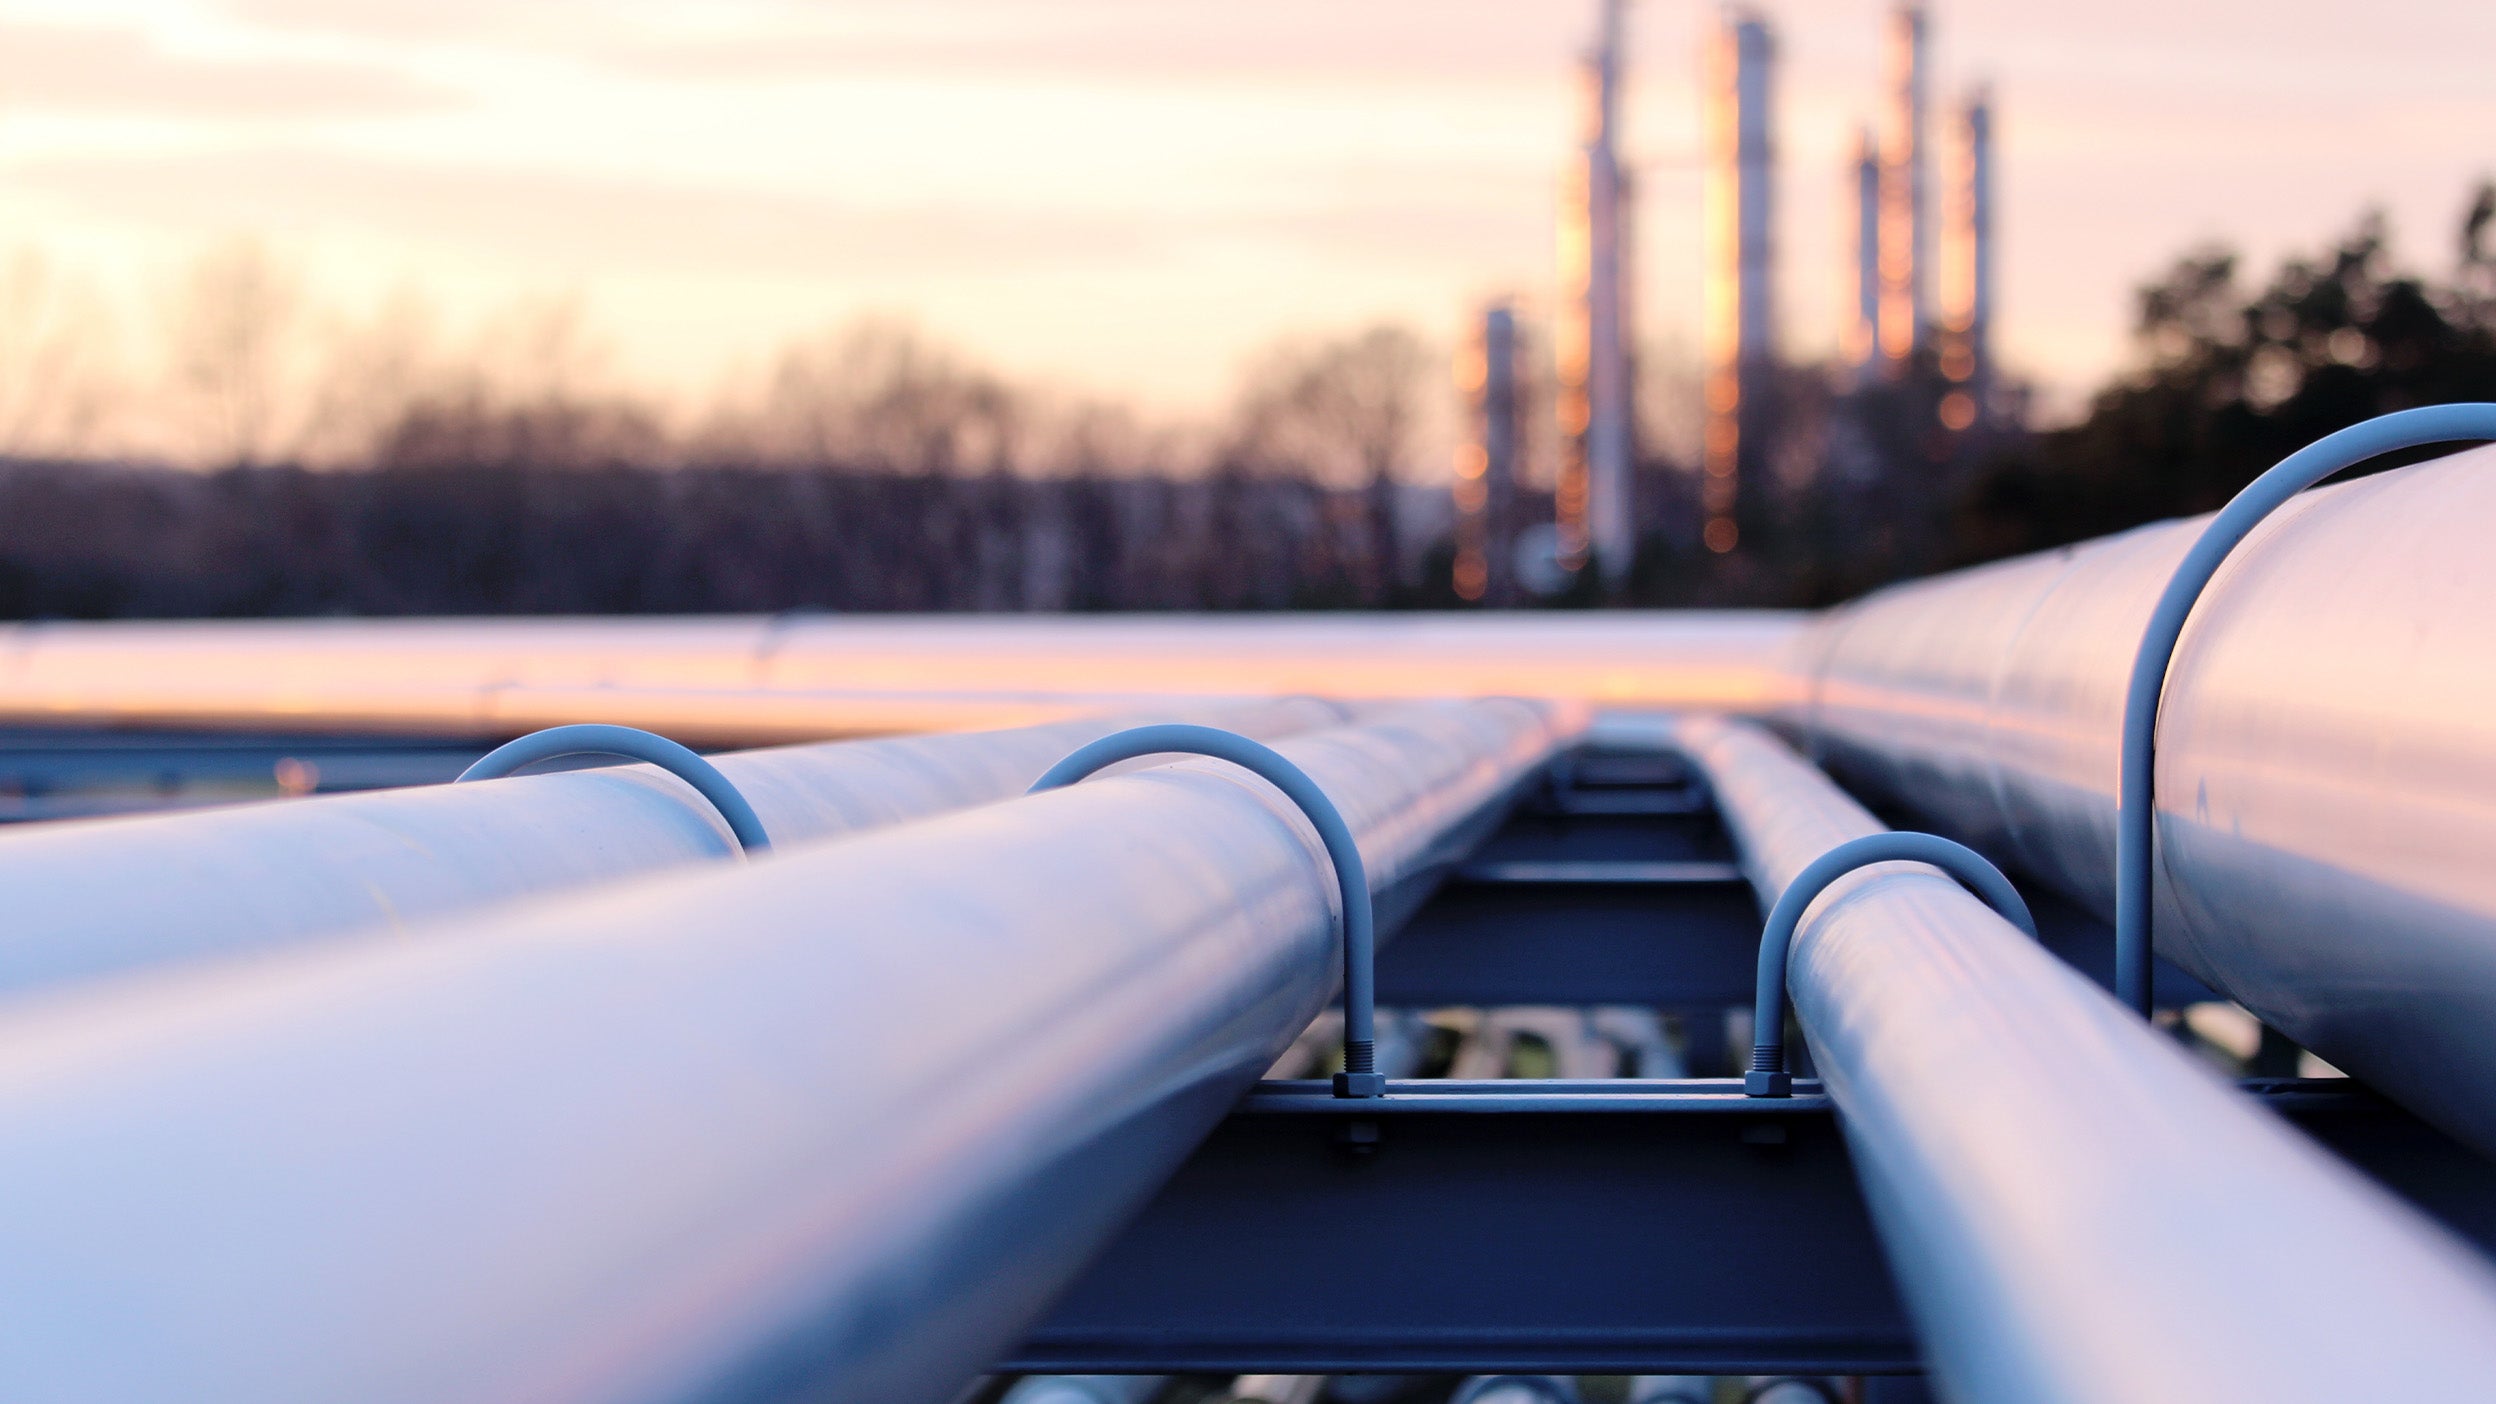 Gas pipes. An introduction to commodities